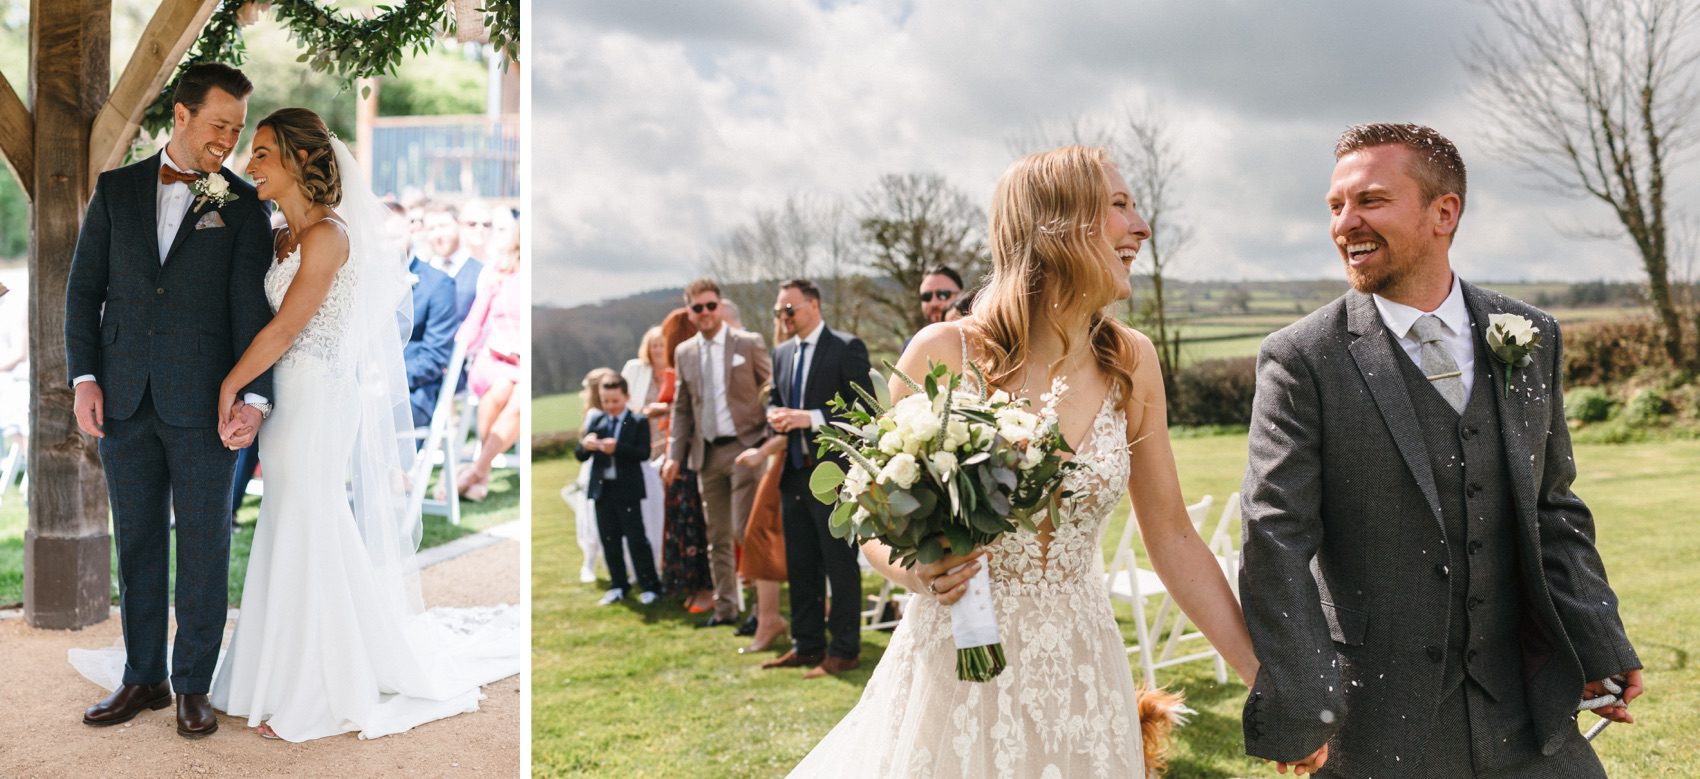 Natural and relaxed wedding ceremony photos - outdoor weddings in Devon & Cornwall